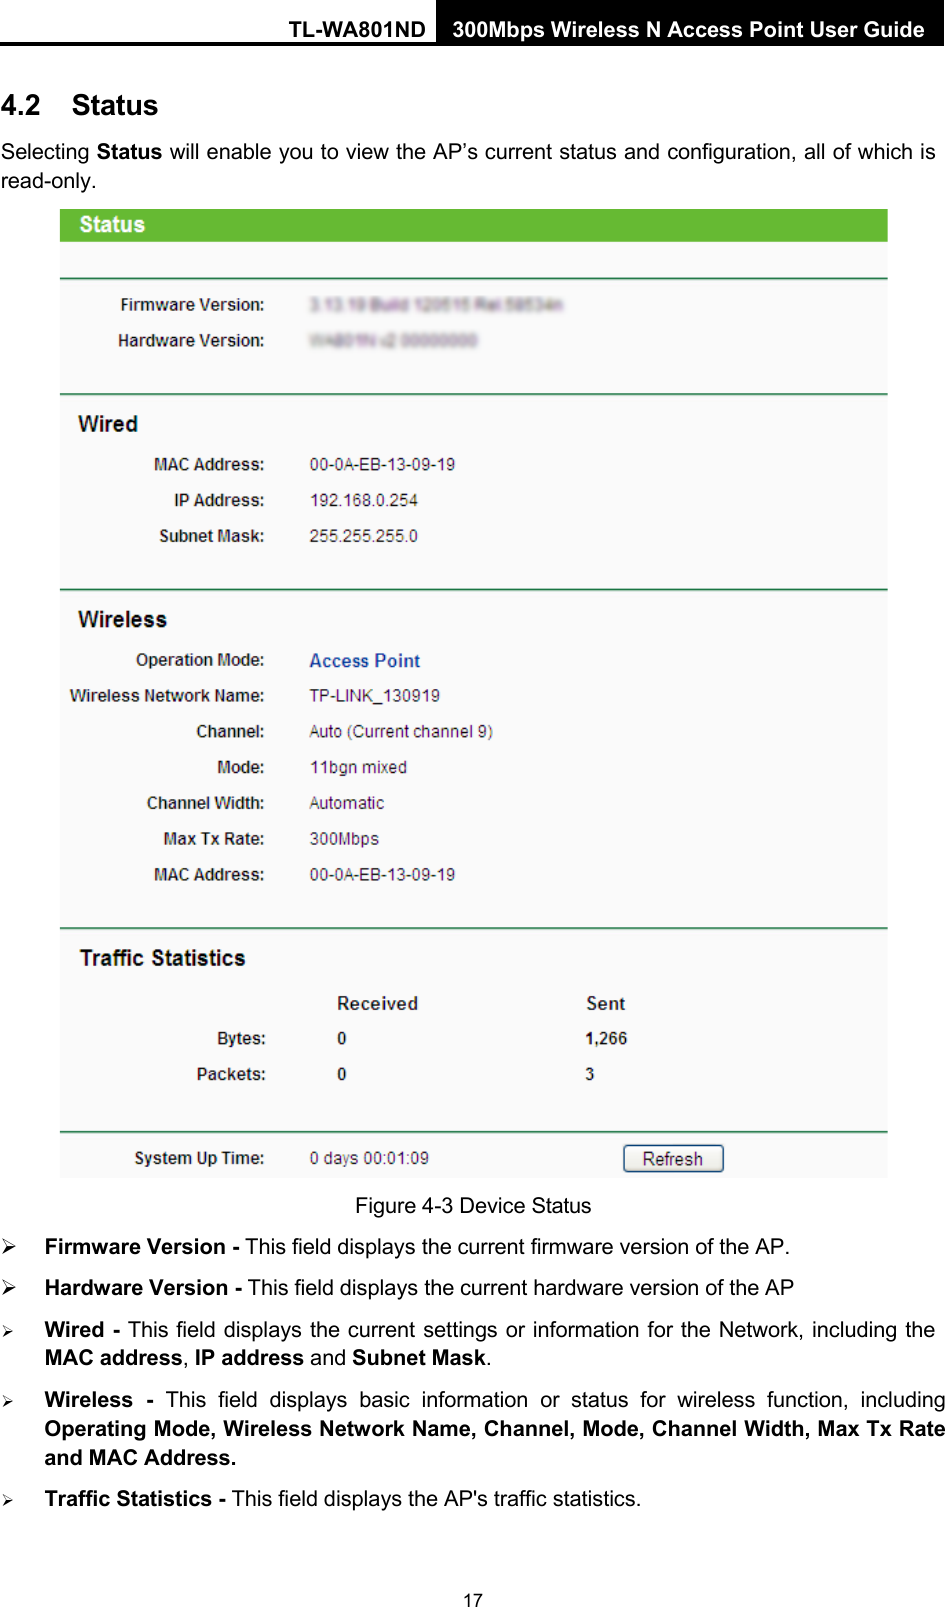 TL-WA801ND 300Mbps Wireless N Access Point User Guide 17    4.2 Status Selecting Status will enable you to view the AP’s current status and configuration, all of which is read-only.   Figure 4-3 Device Status  Firmware Version - This field displays the current firmware version of the AP.  Hardware Version - This field displays the current hardware version of the AP  Wired - This field displays the current settings or information for the Network, including the MAC address, IP address and Subnet Mask.  Wireless  -  This field displays basic information or status for wireless function, including Operating Mode, Wireless Network Name, Channel, Mode, Channel Width, Max Tx Rate and MAC Address.  Traffic Statistics - This field displays the AP&apos;s traffic statistics. 